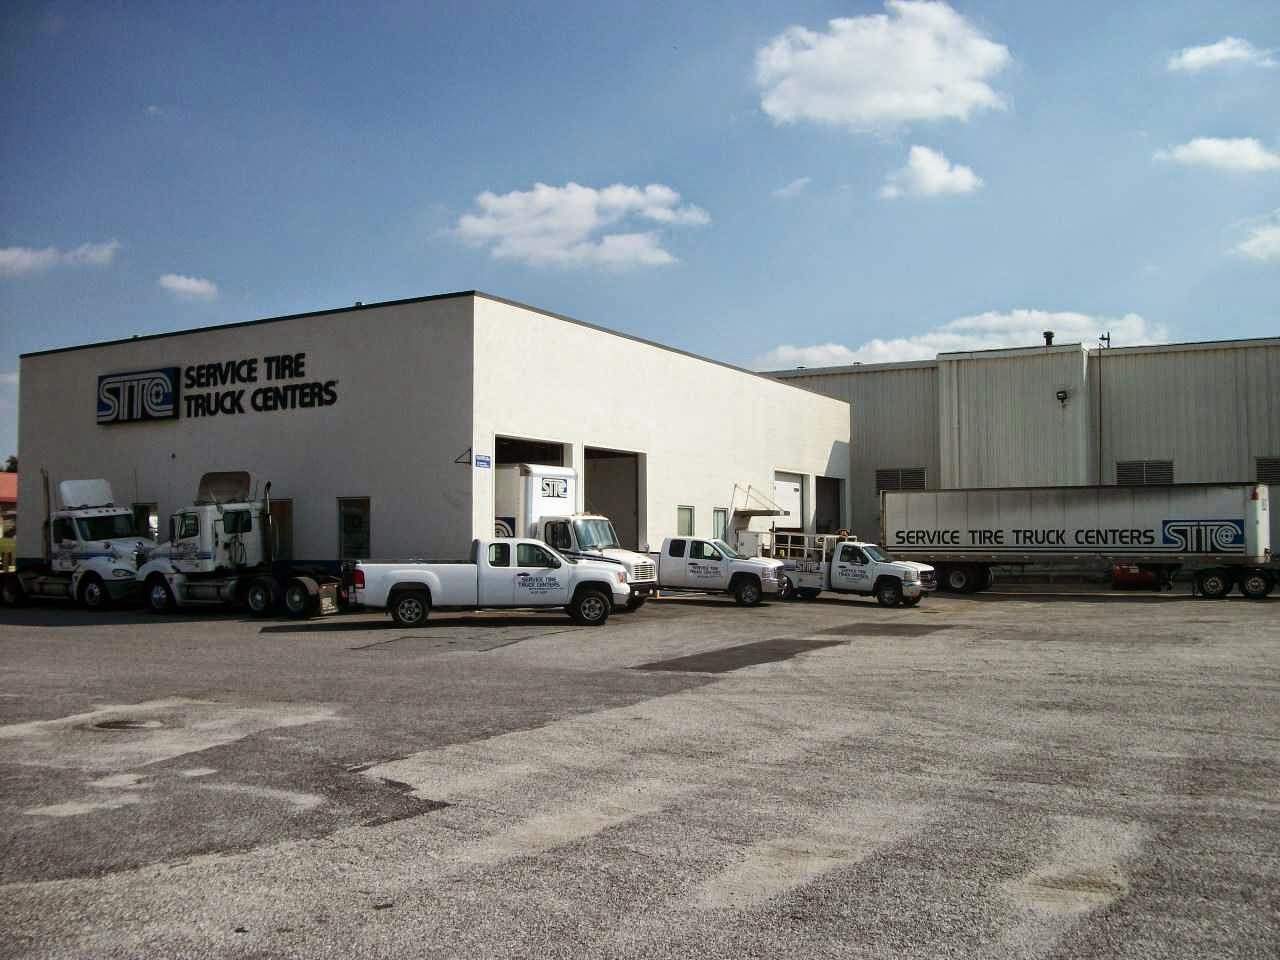 Service Tire Truck Centers - Commercial Truck Tires at York, PA